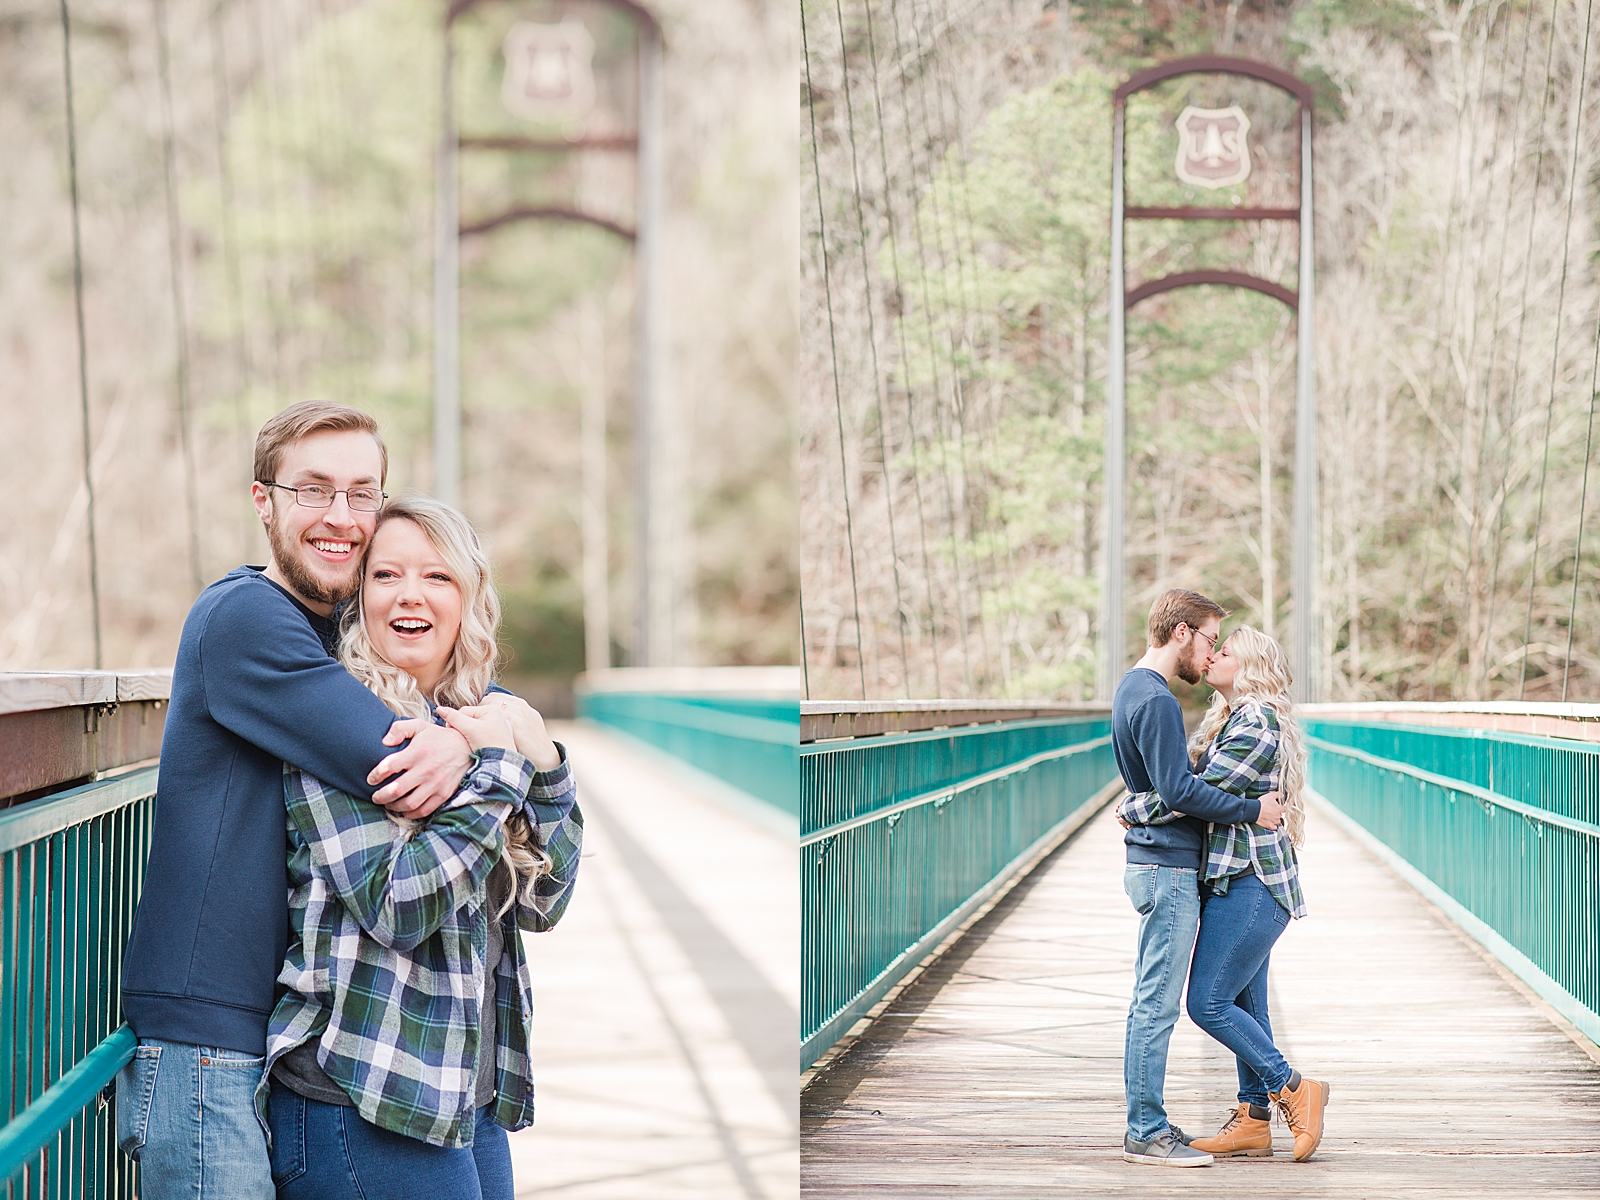 Ocoee River Engagement Session Cody and Haley hugging and kissing on bridge Photos